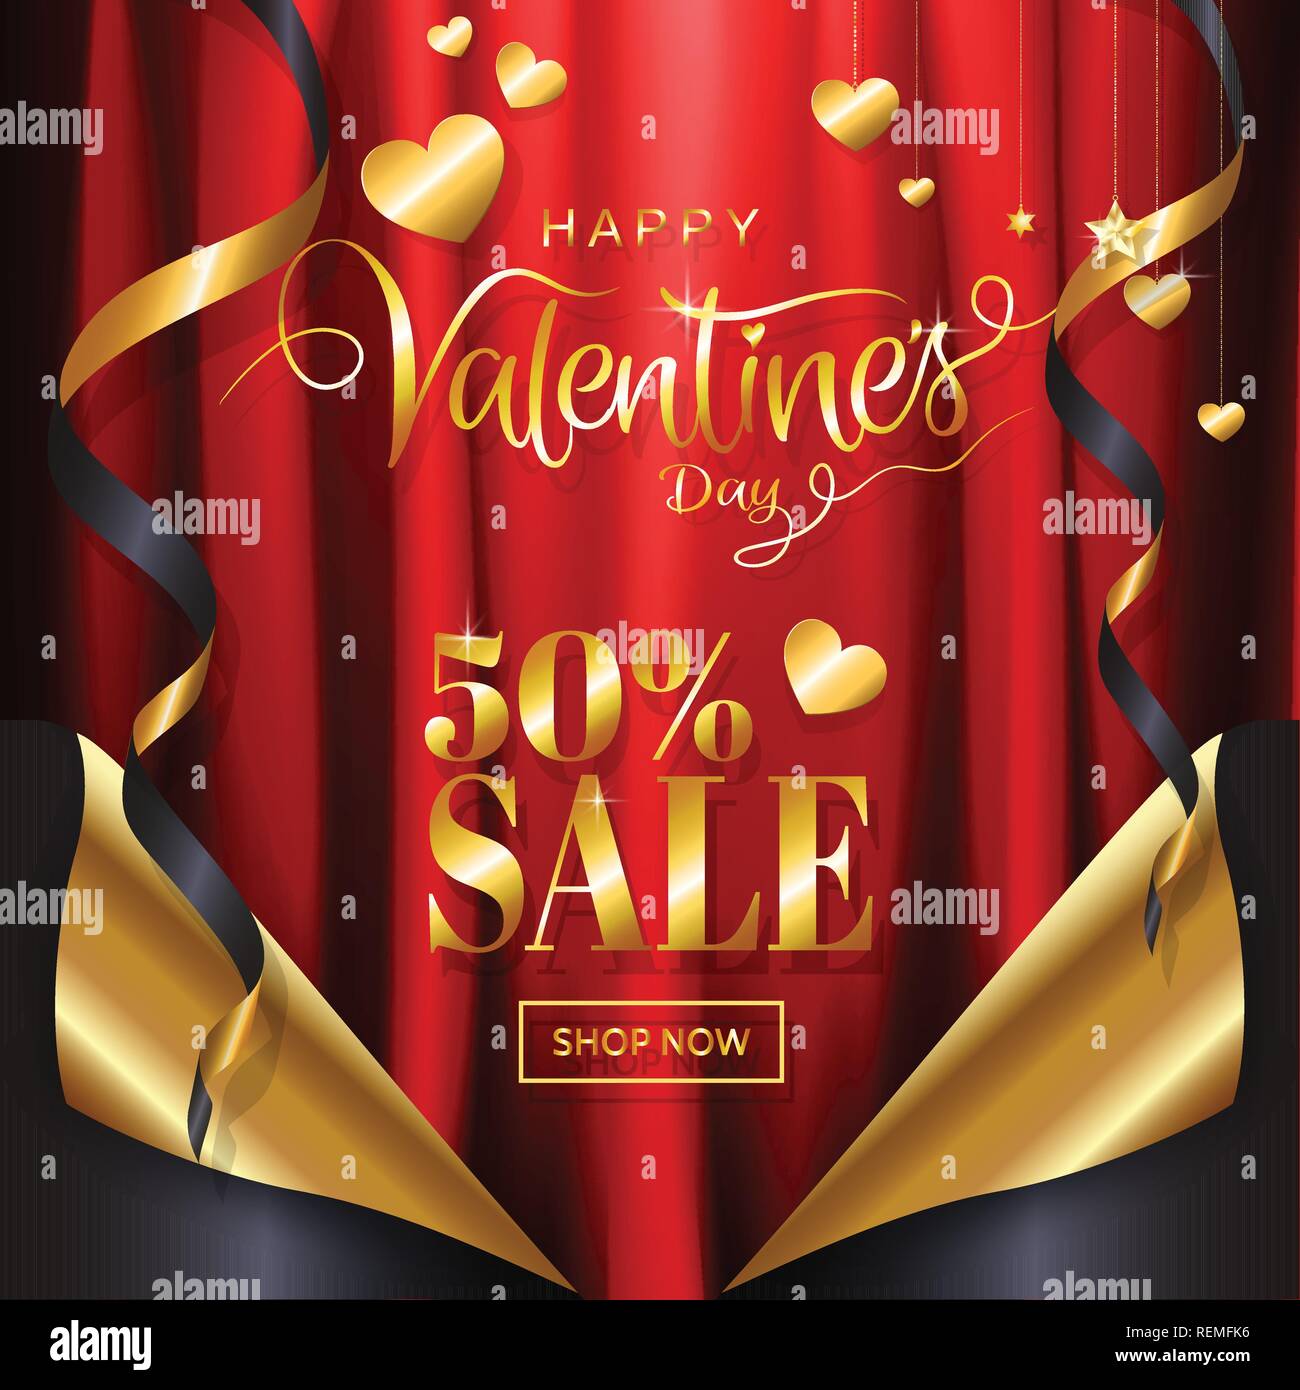 Valentine's day sale background page curl style with red satin fabric background with gold ribbin, glitter ornamental calligraphy for promotion banner Stock Vector